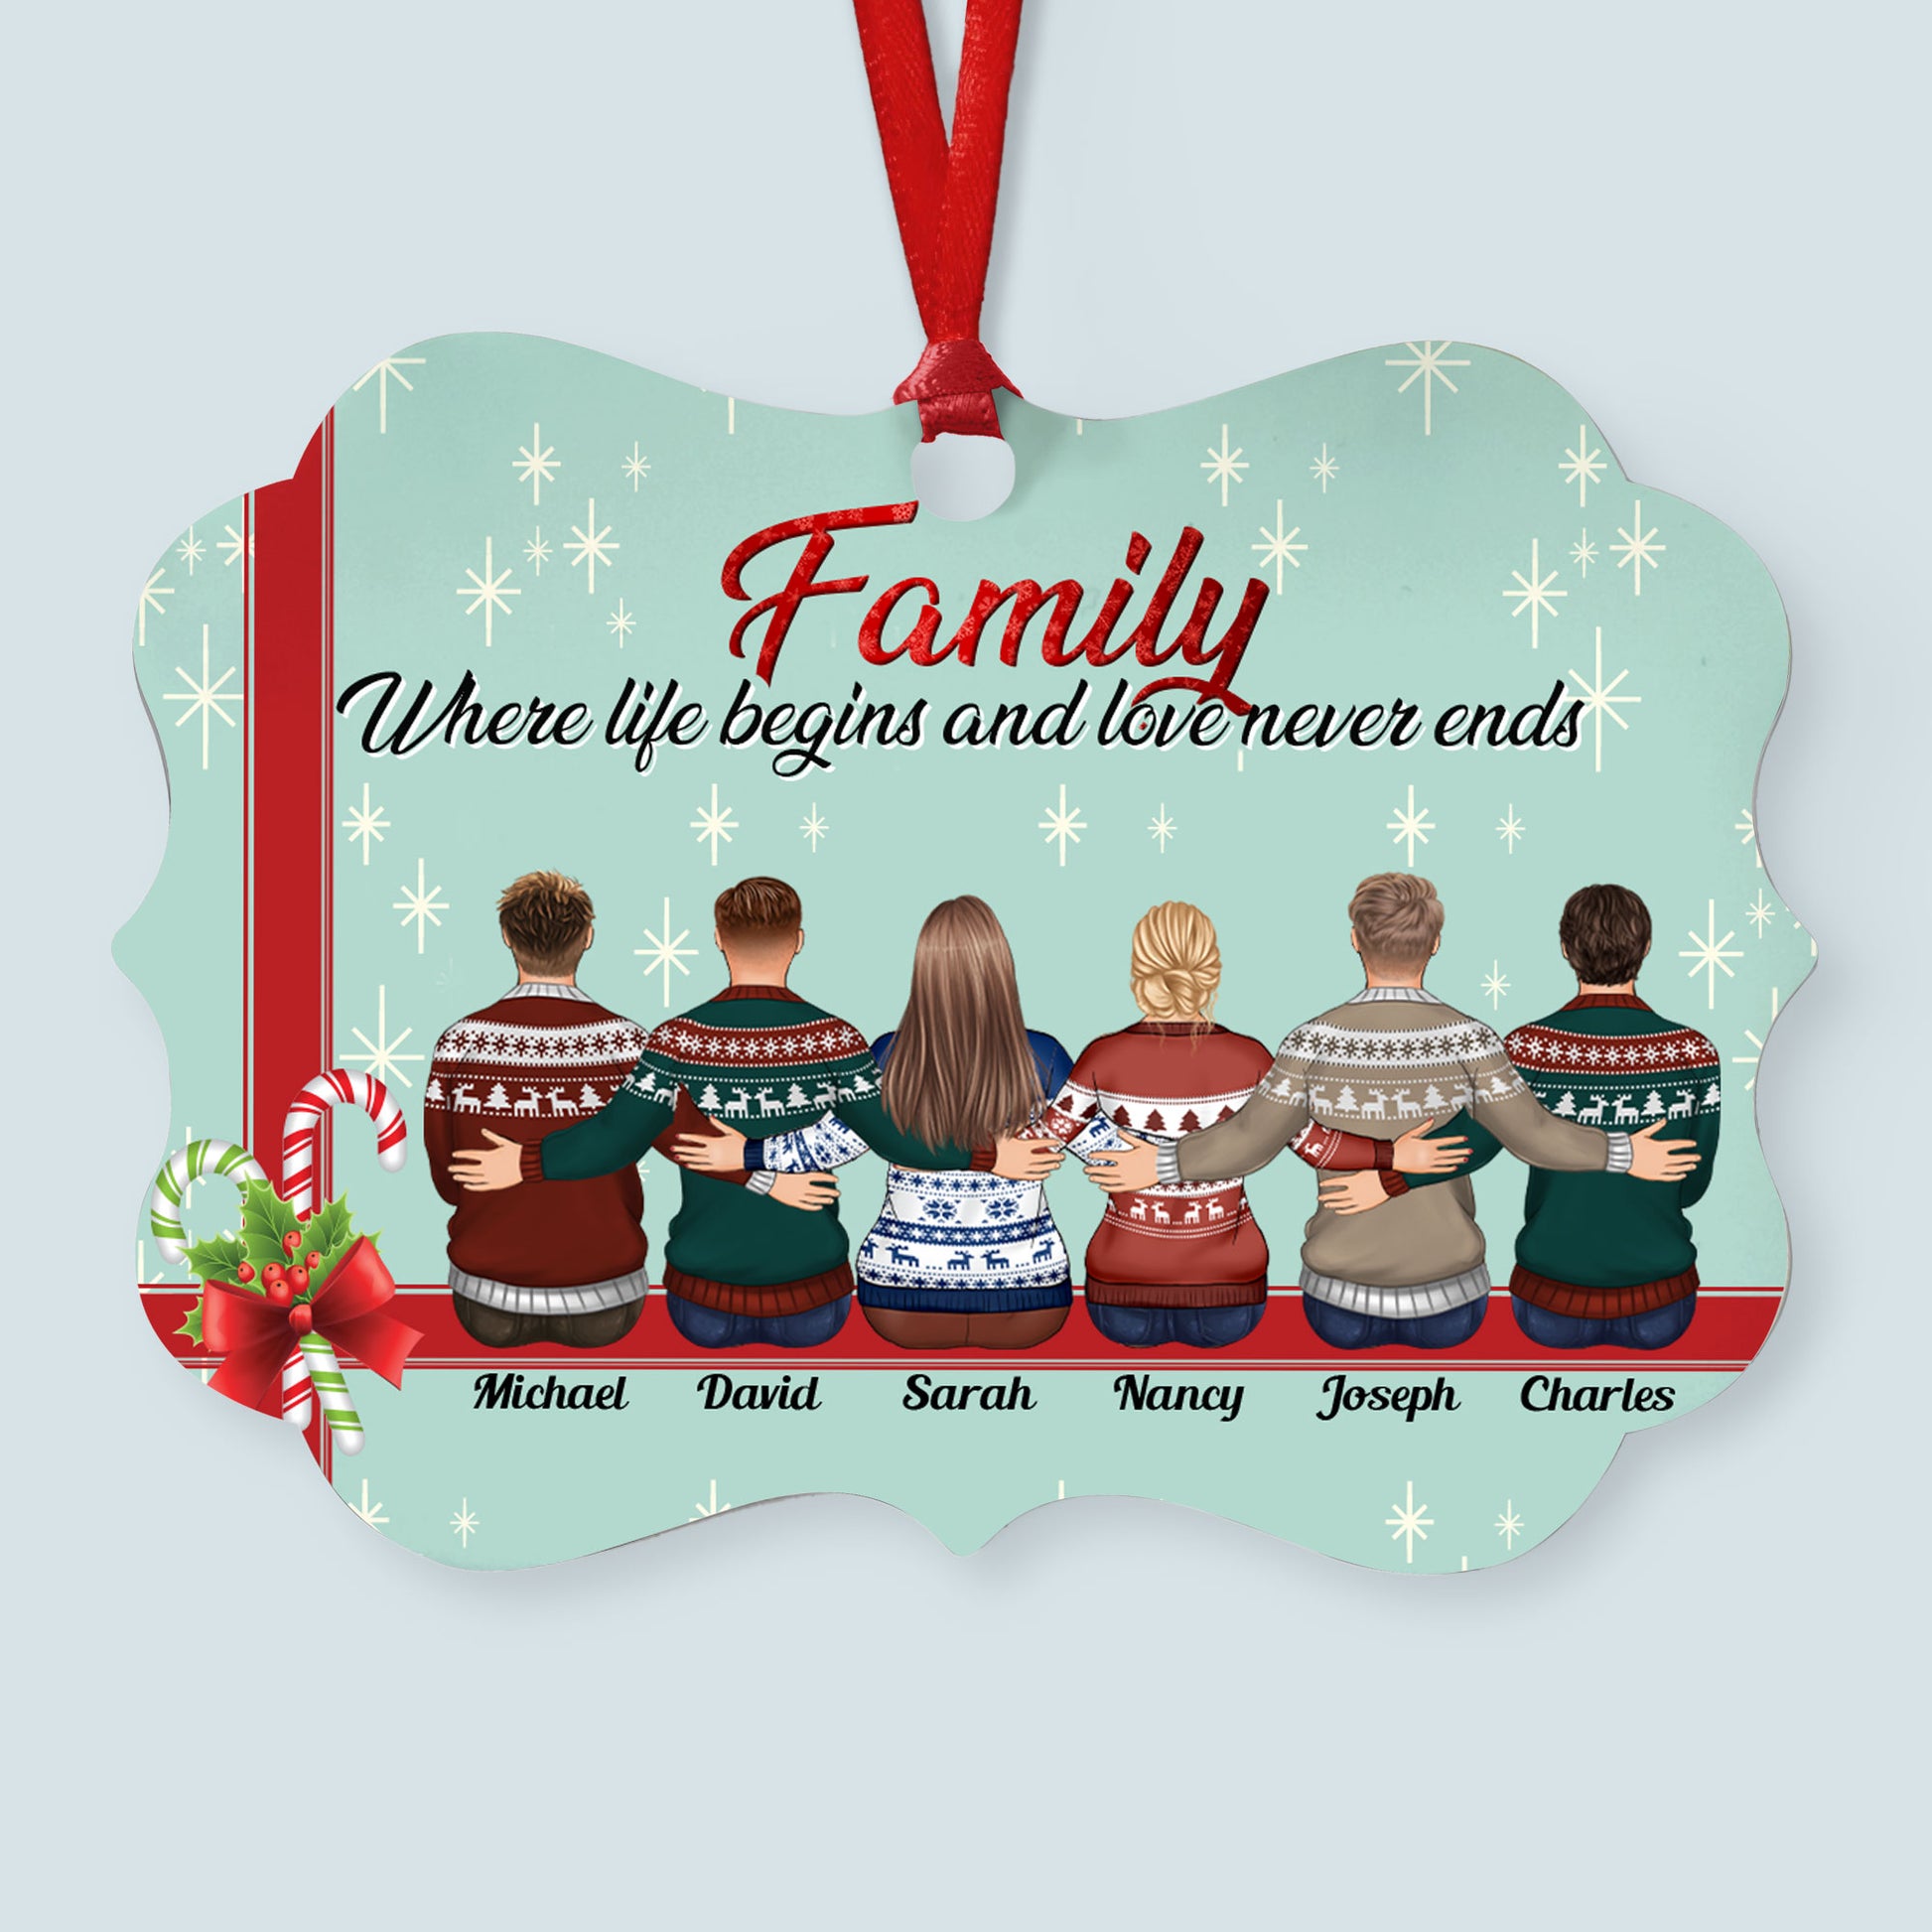 Life Begins And Love Never Ends - Personalized Aluminum Ornament - Christmas Gift For Family Members